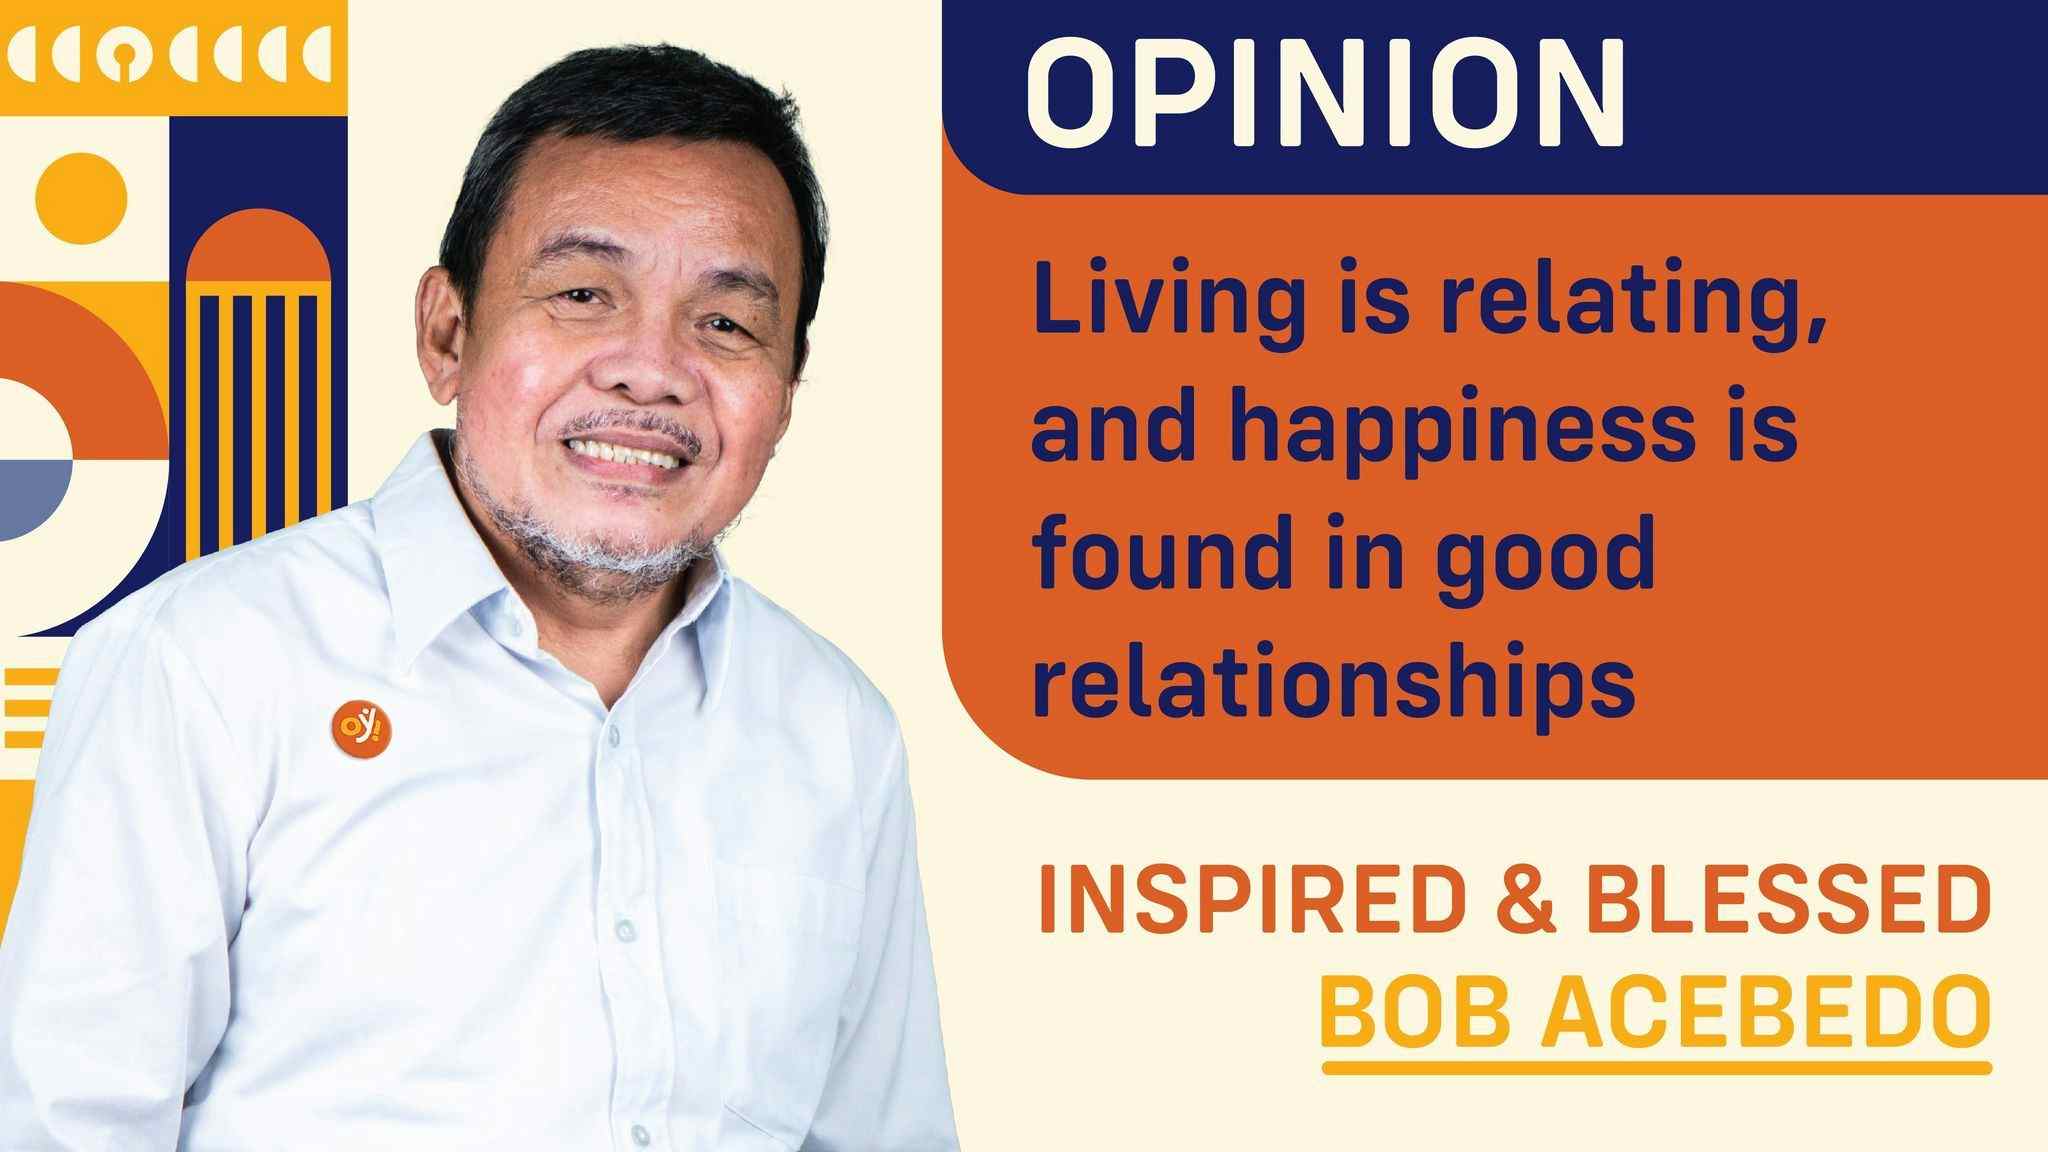 Living is relating, and happiness is found in good relationships